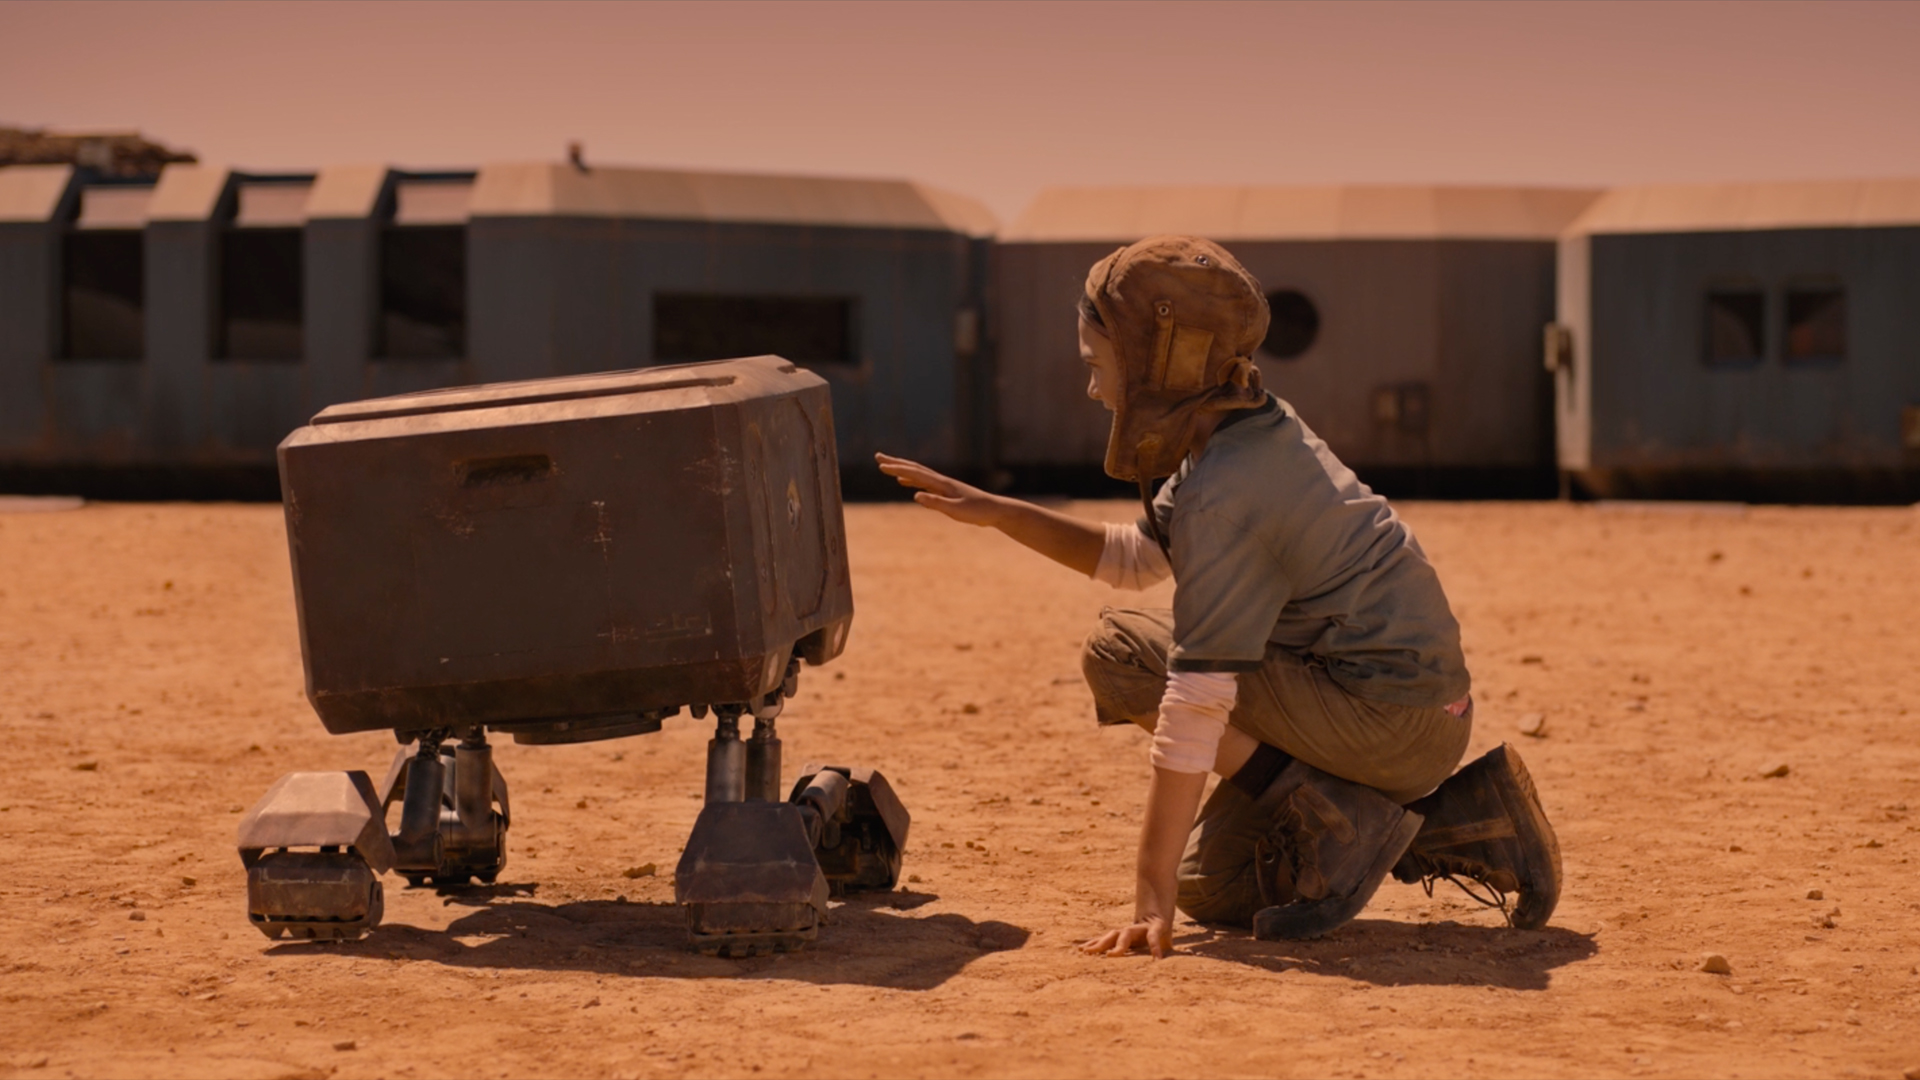 Settlers Clip Has a Warning For Family at a Homestead on Mars